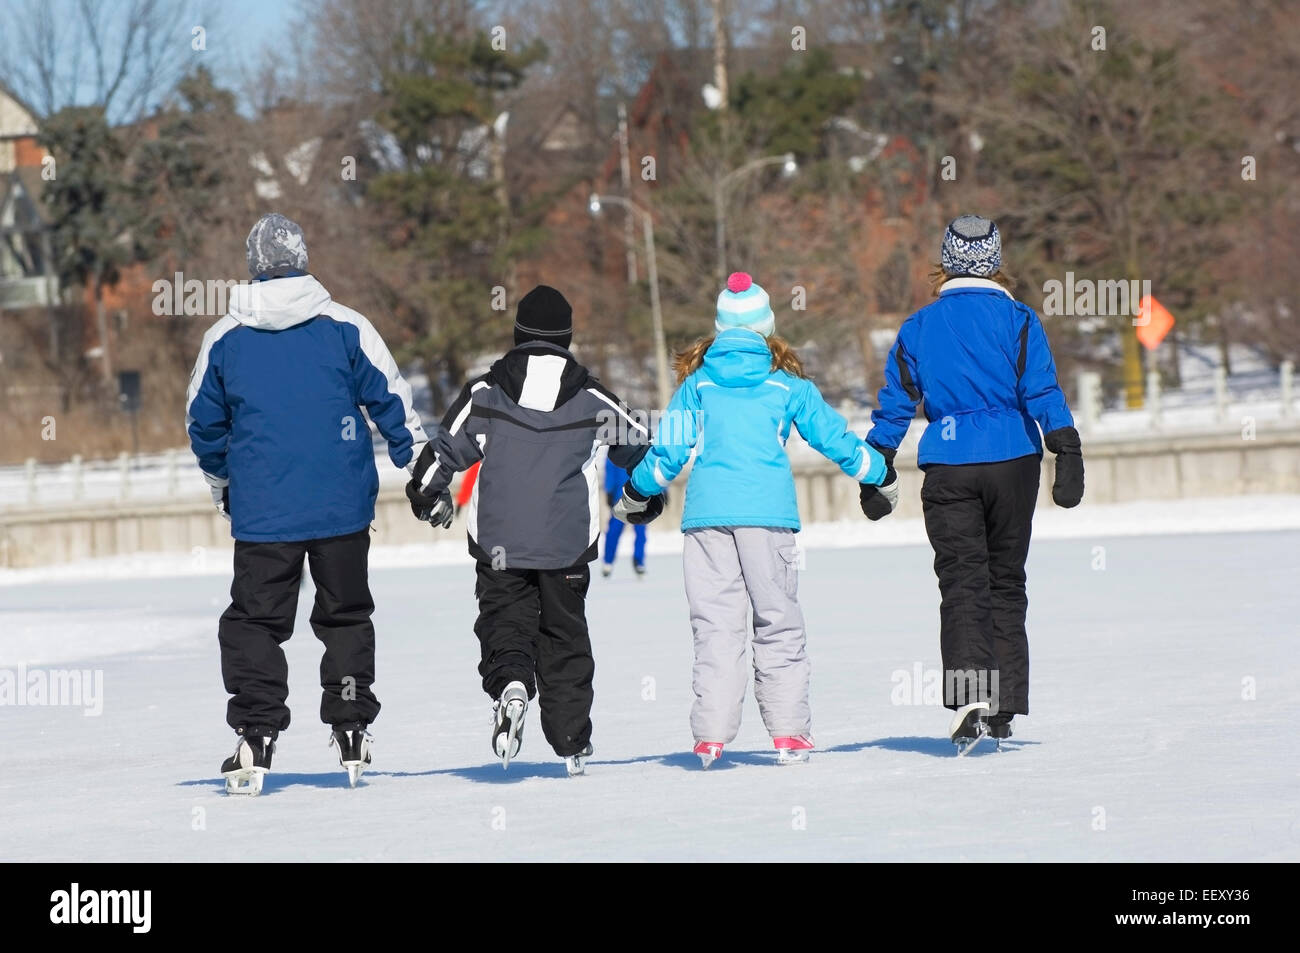 Family ice skating outdoors in winter together Stock Photo